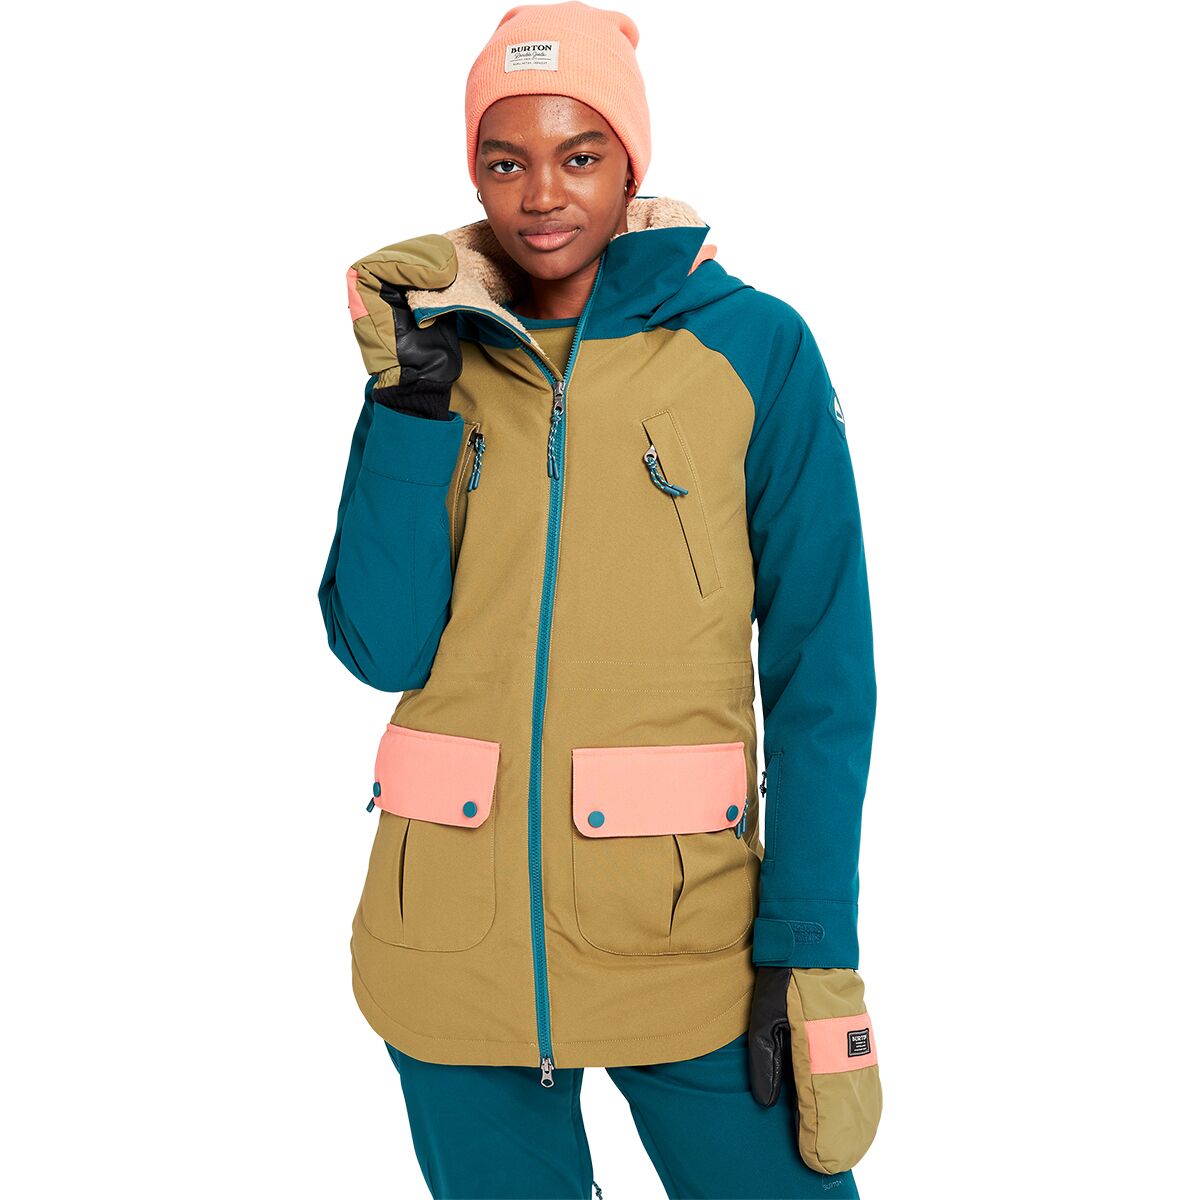 Burton Prowess Jacket - Women's Shaded Spruce/Martini Olive/Persimmon